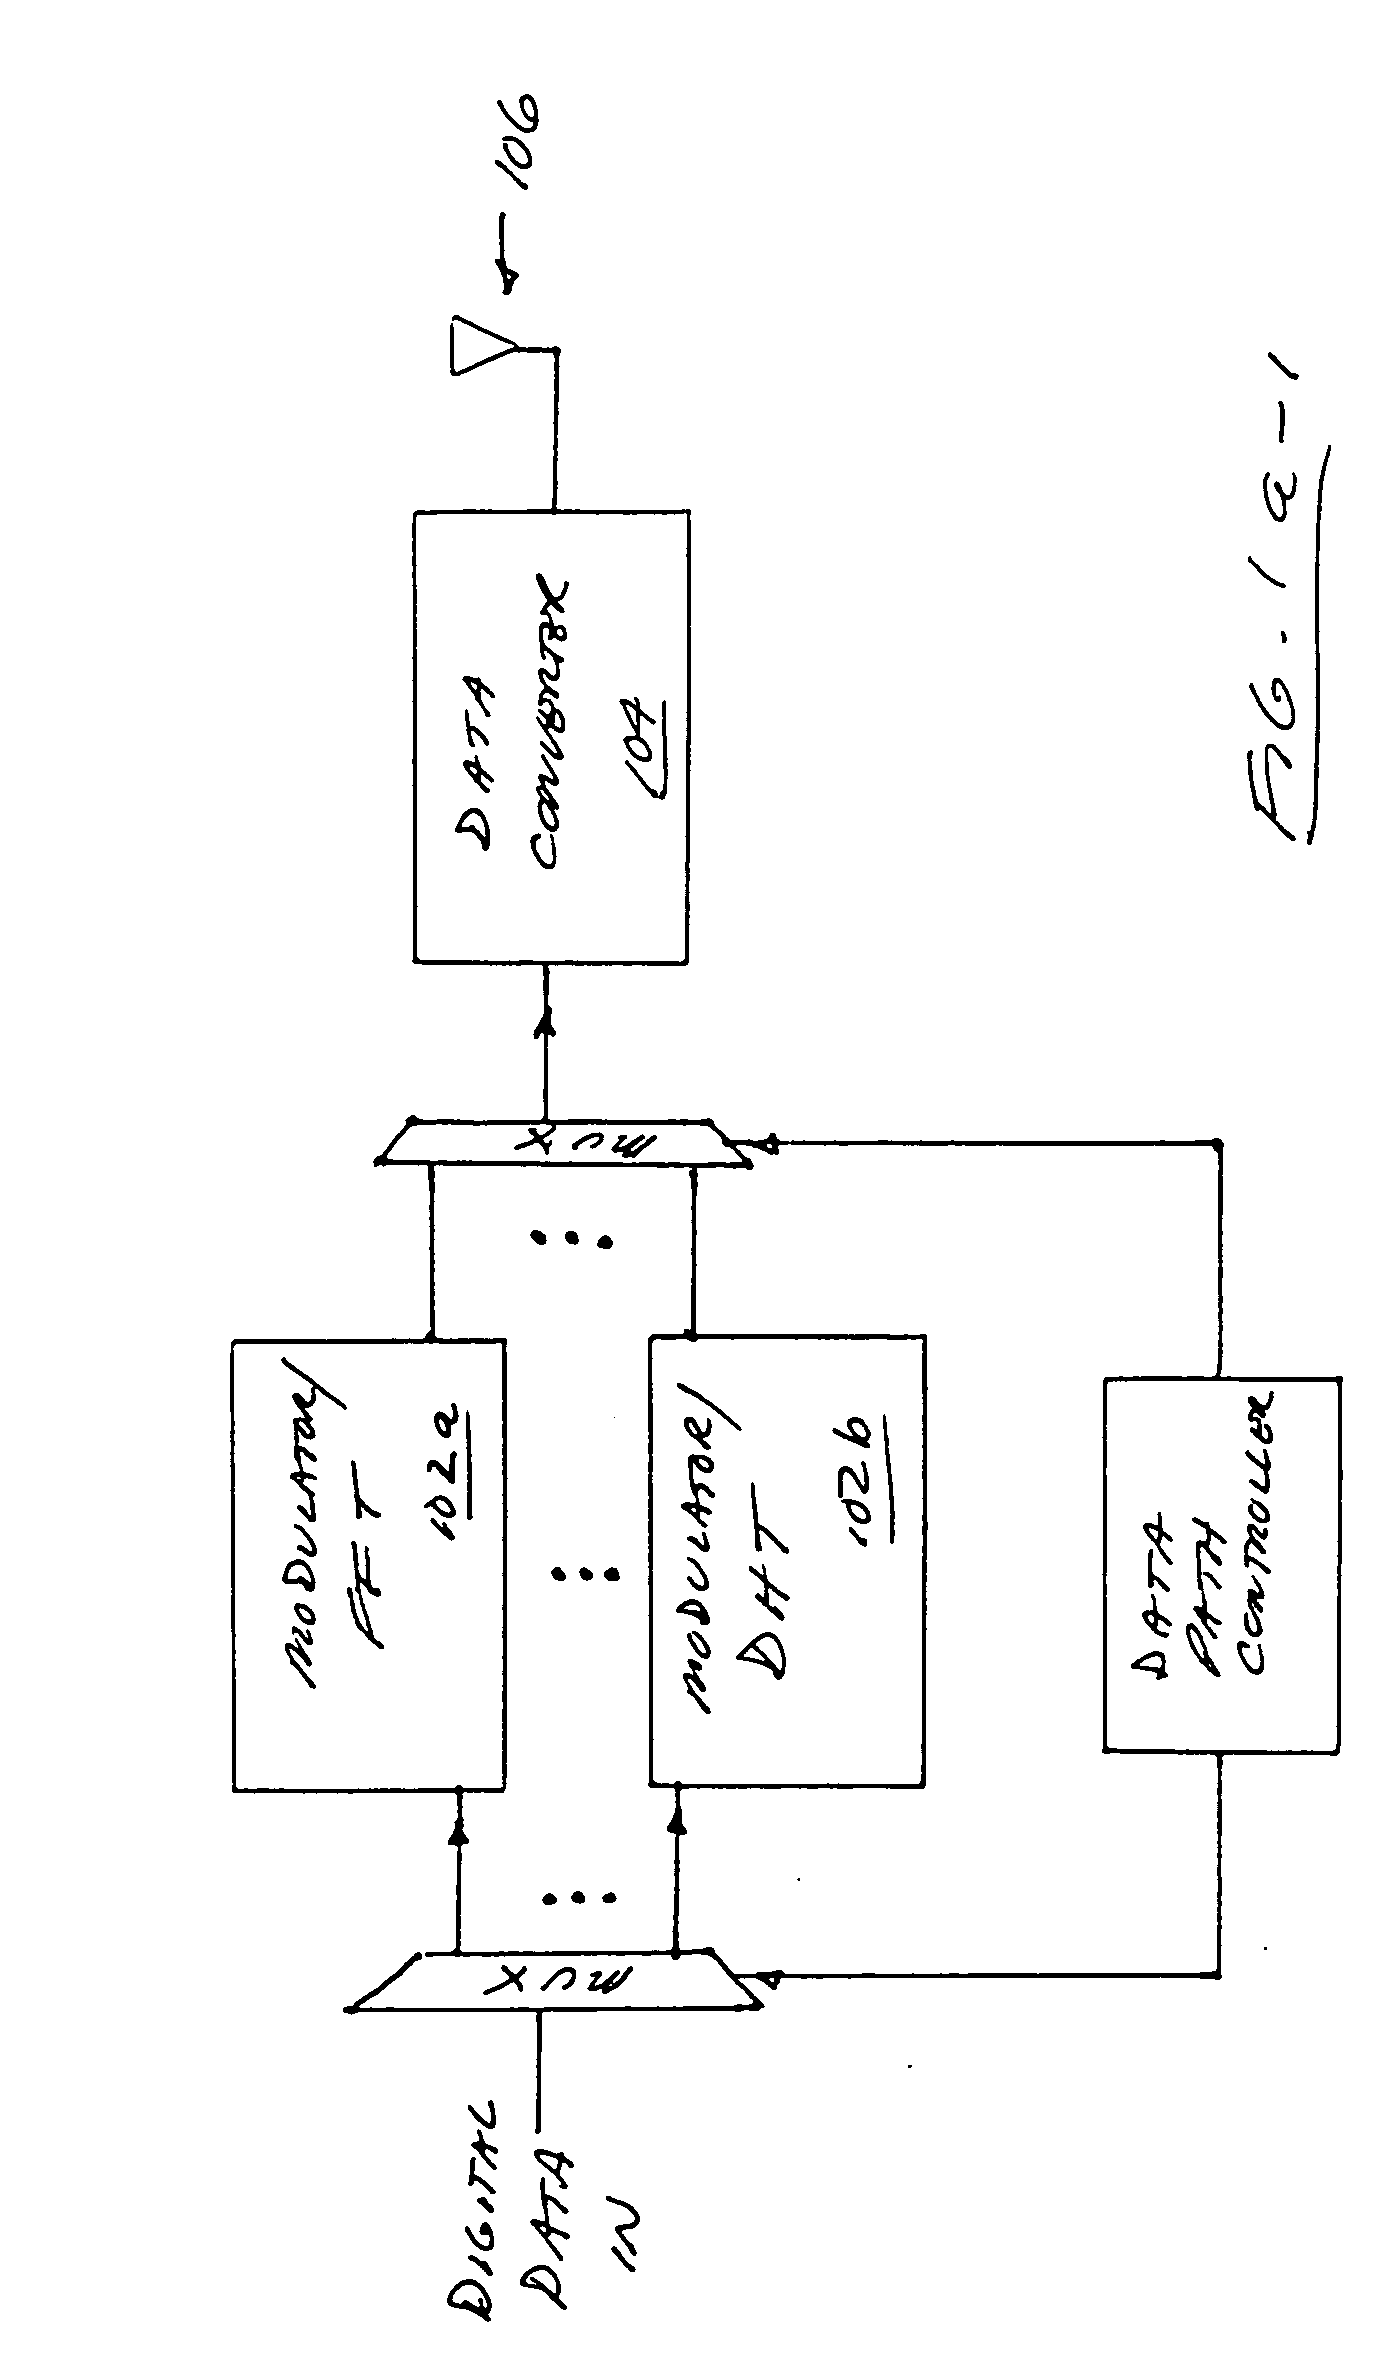 Software-defined wideband holographic communications apparatus and methods